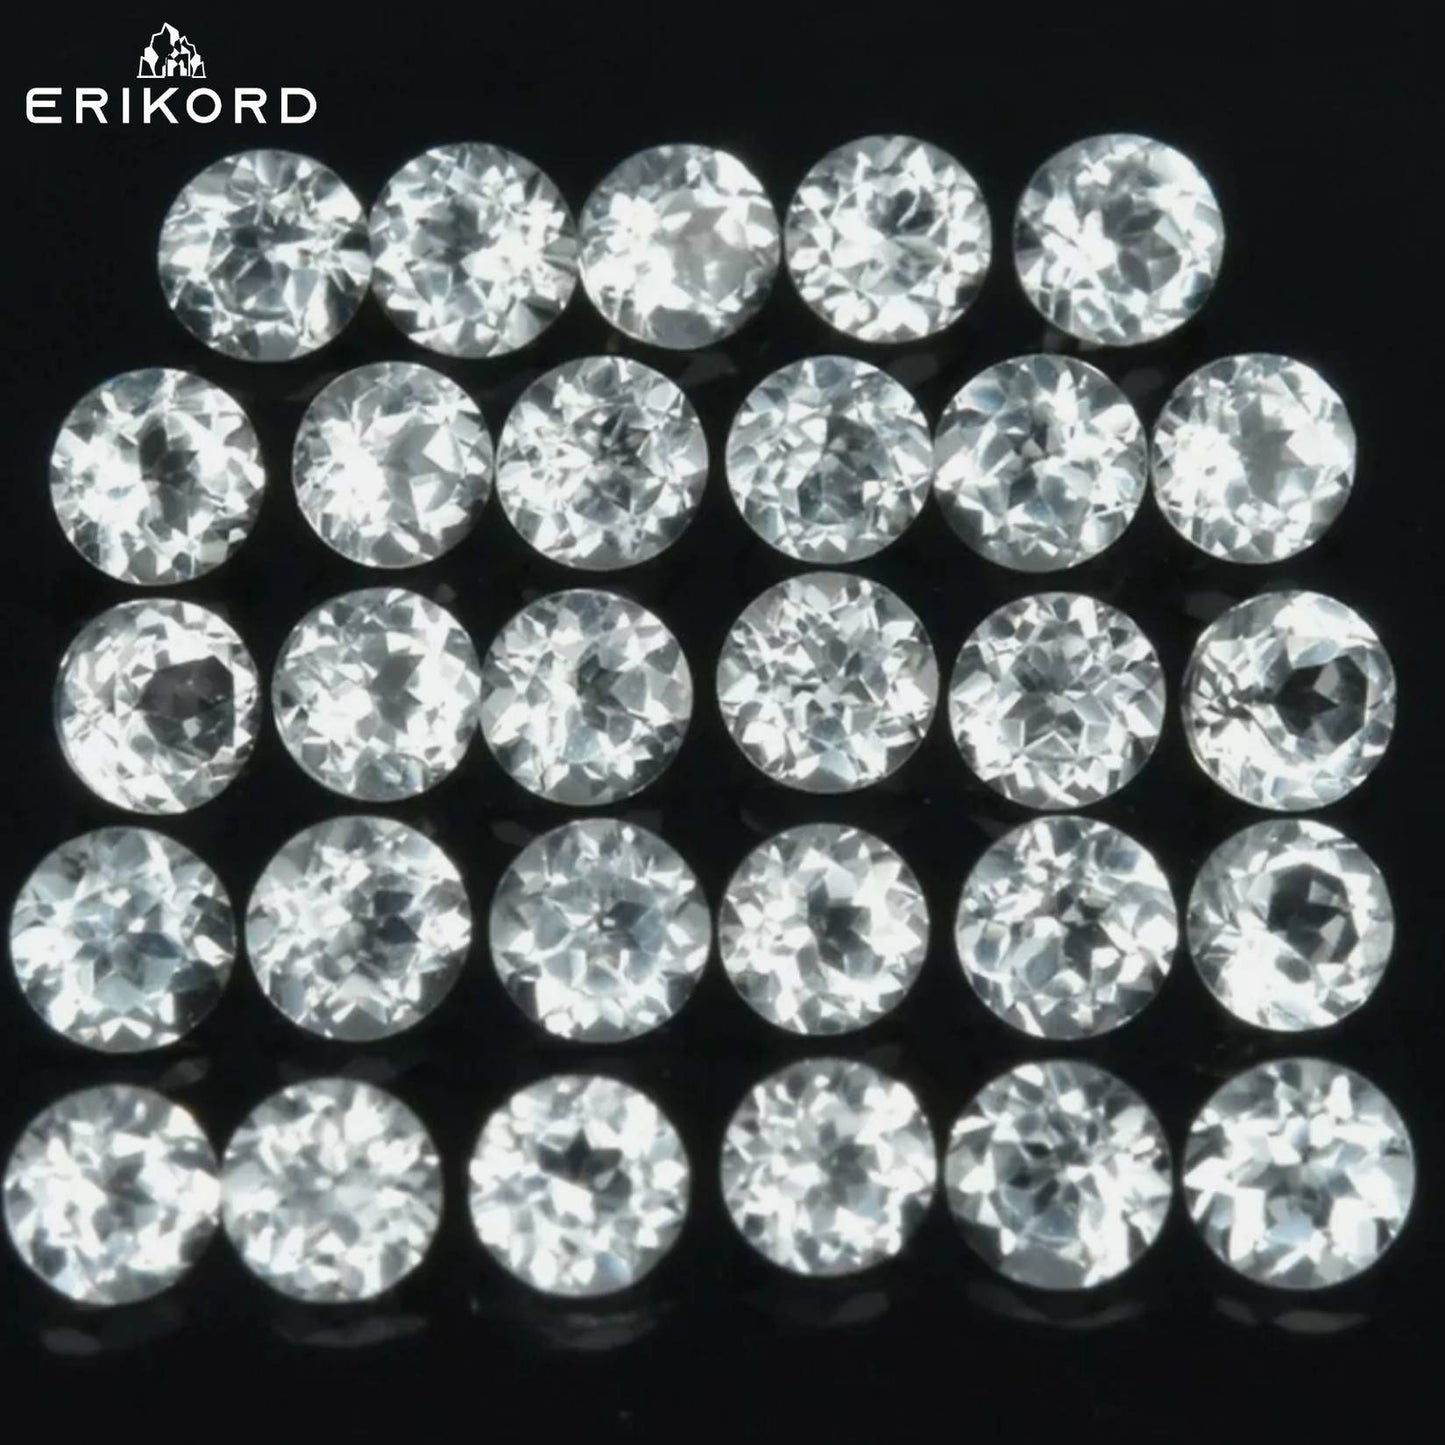 29pc Lot of White Topaz Extra Small 2.7mm Round Faceted Natural Unheated White Topaz Cut Gems Brazil Natural Faceted Gem Lot Loose Stones